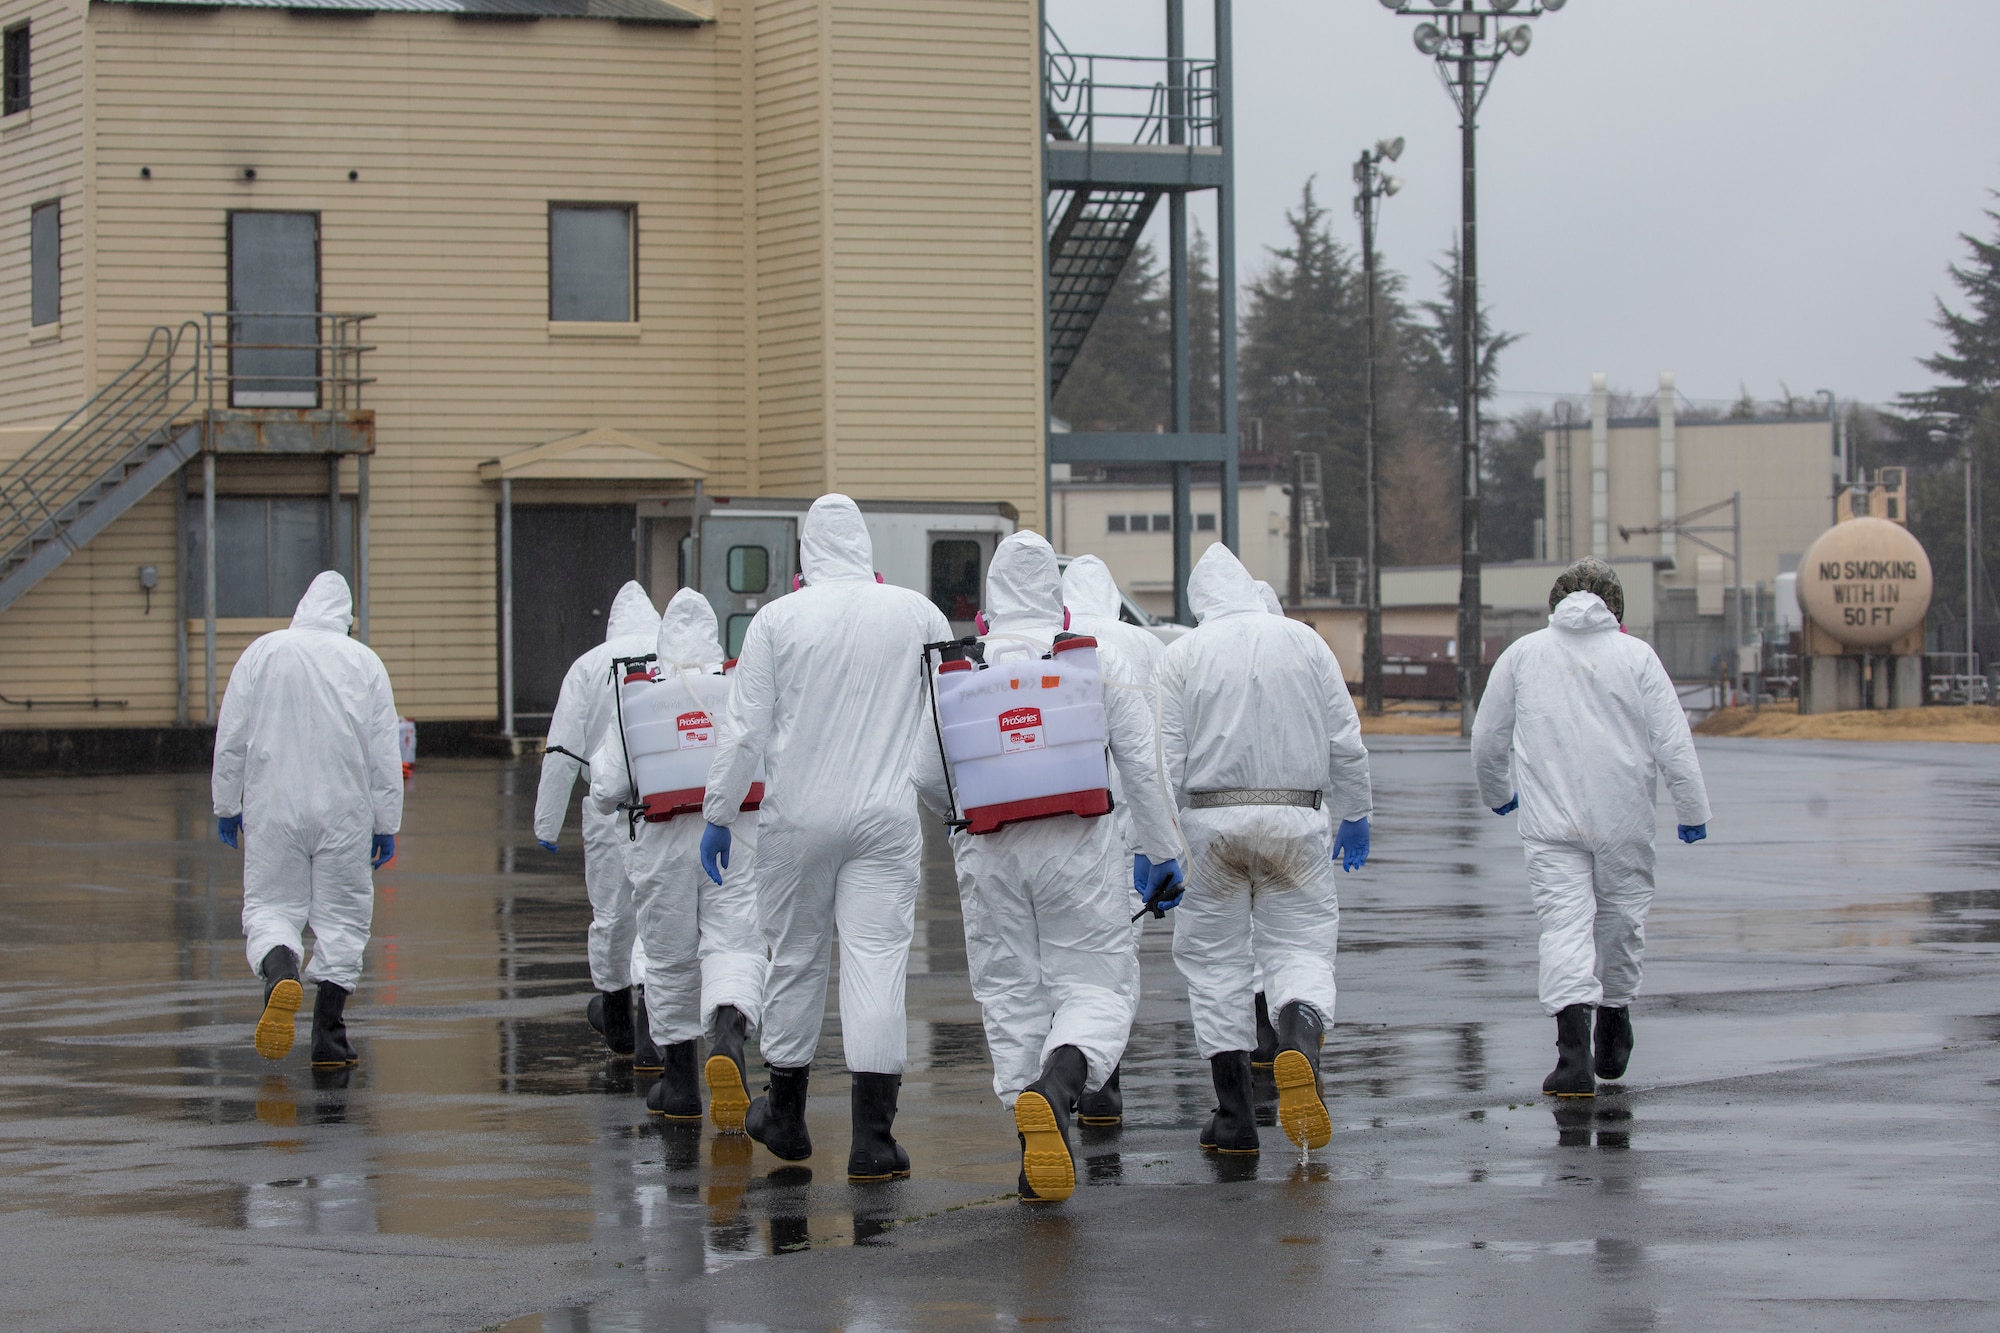 Airmen with the 374th Maintenance Squadron repair and reclamation section complete a simulated decontamination procedures at Yokota Air Base, Japan